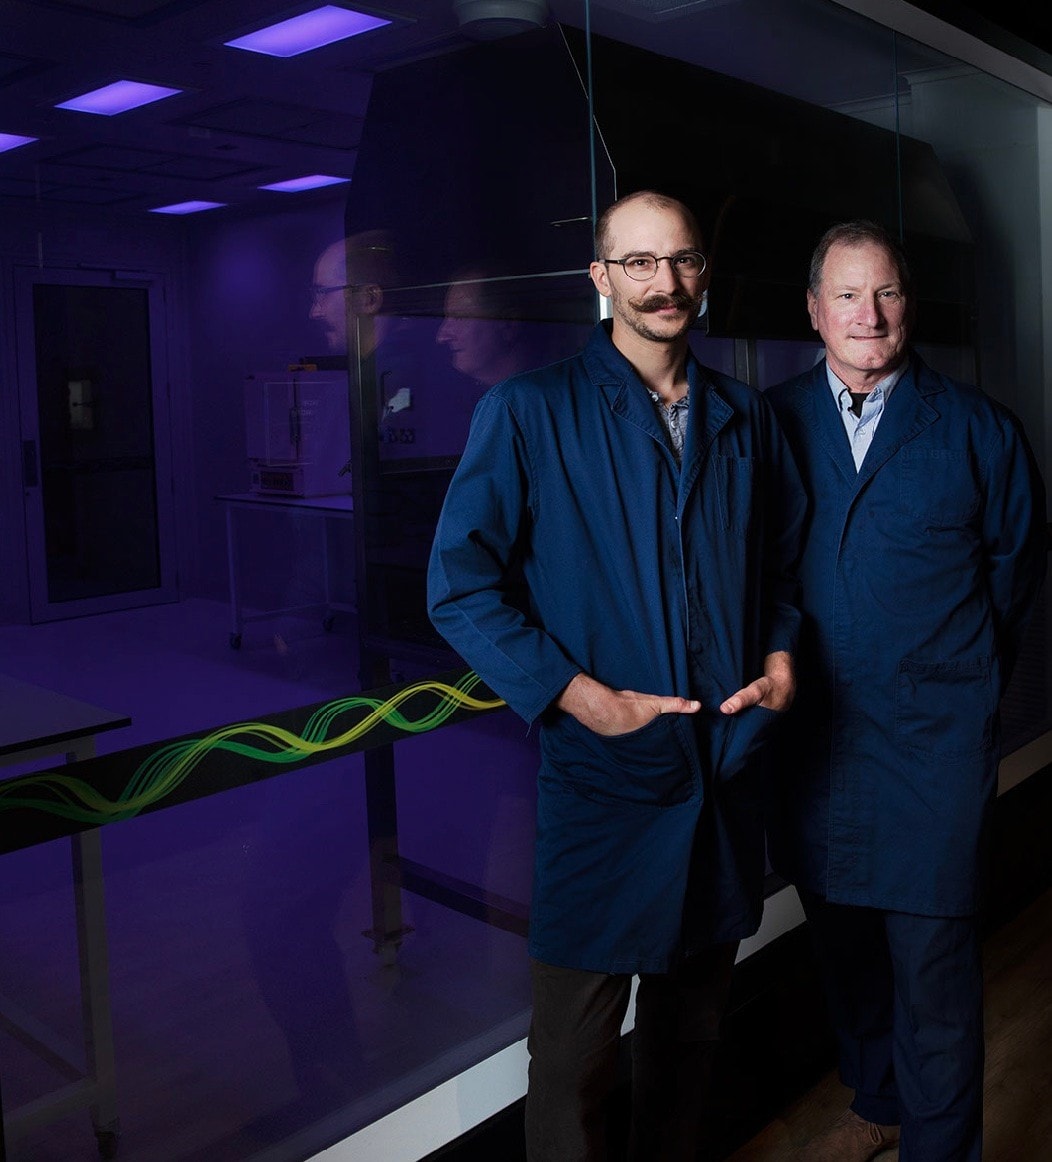 photo of the two researchers in lab coats Mr Samuel  Eggenbergerand Professor Gregg Suaning